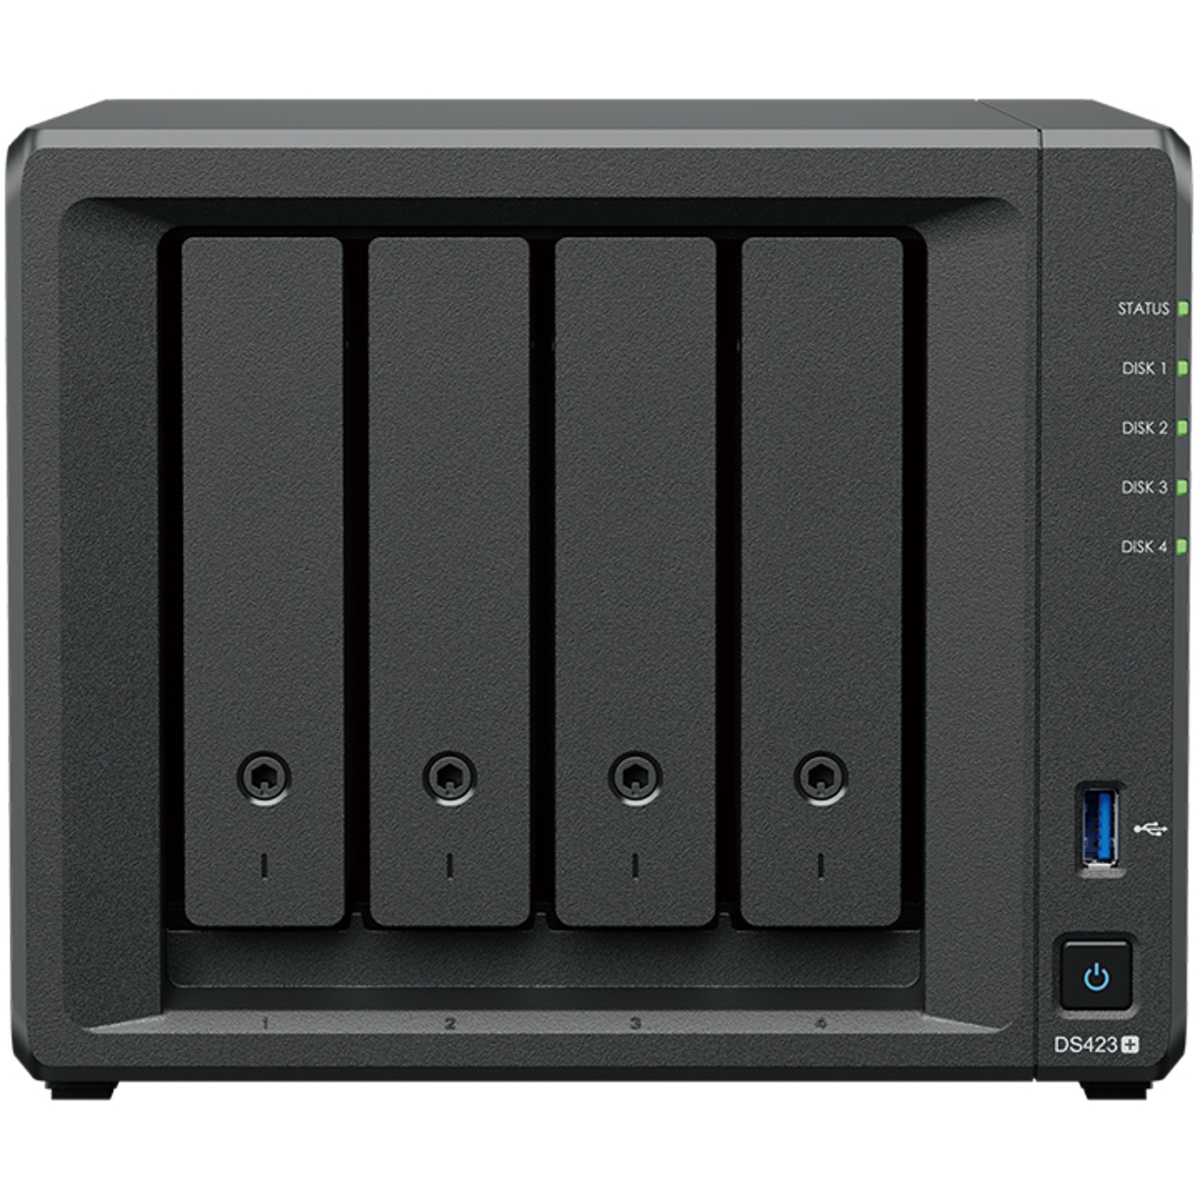 Synology DiskStation DS423+ 48tb 4-Bay Desktop Multimedia / Power User / Business NAS - Network Attached Storage Device 4x12tb Western Digital Ultrastar DC HC520 HUH721212ALE600 3.5 7200rpm SATA 6Gb/s HDD ENTERPRISE Class Drives Installed - Burn-In Tested - FREE RAM UPGRADE DiskStation DS423+